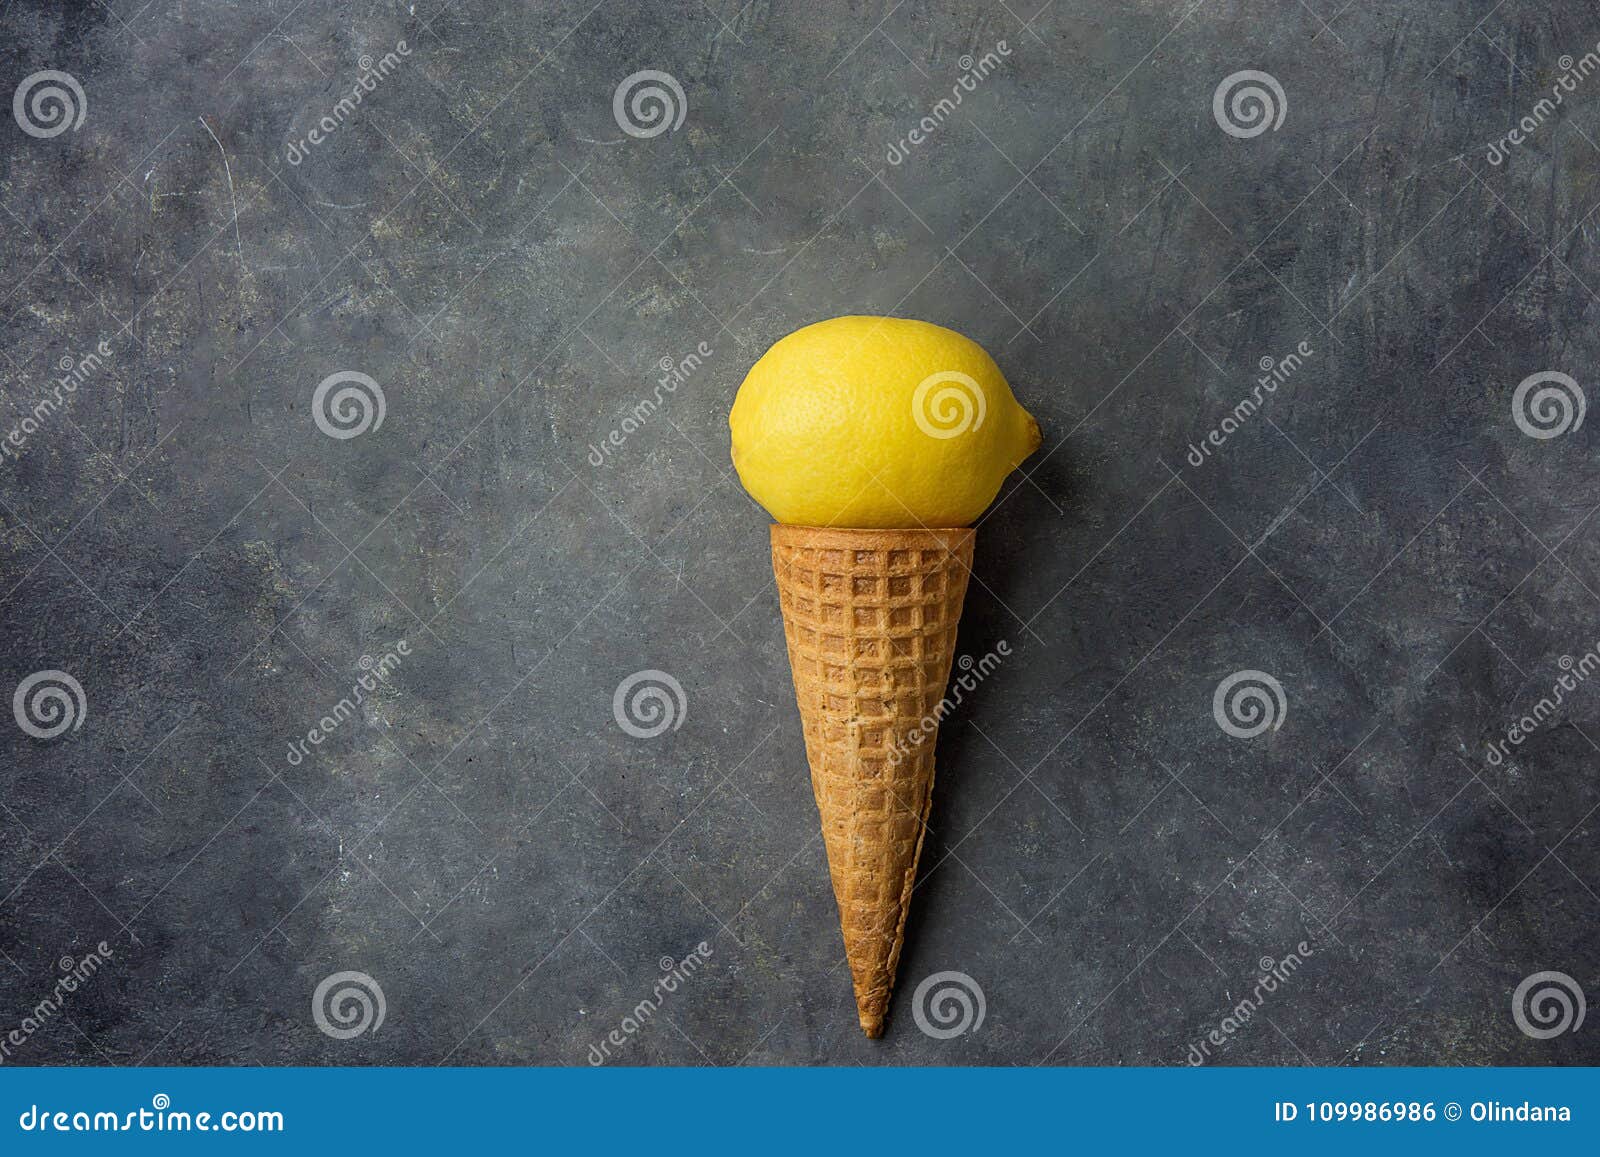 Bright Ripe Yellow Lemon in Waffle Ice Cream Cone on Dark Concrete Stone Background. Summer Fruits Dessert Freshness Vitamins Concept. Branding Image for Artisanal Food Products